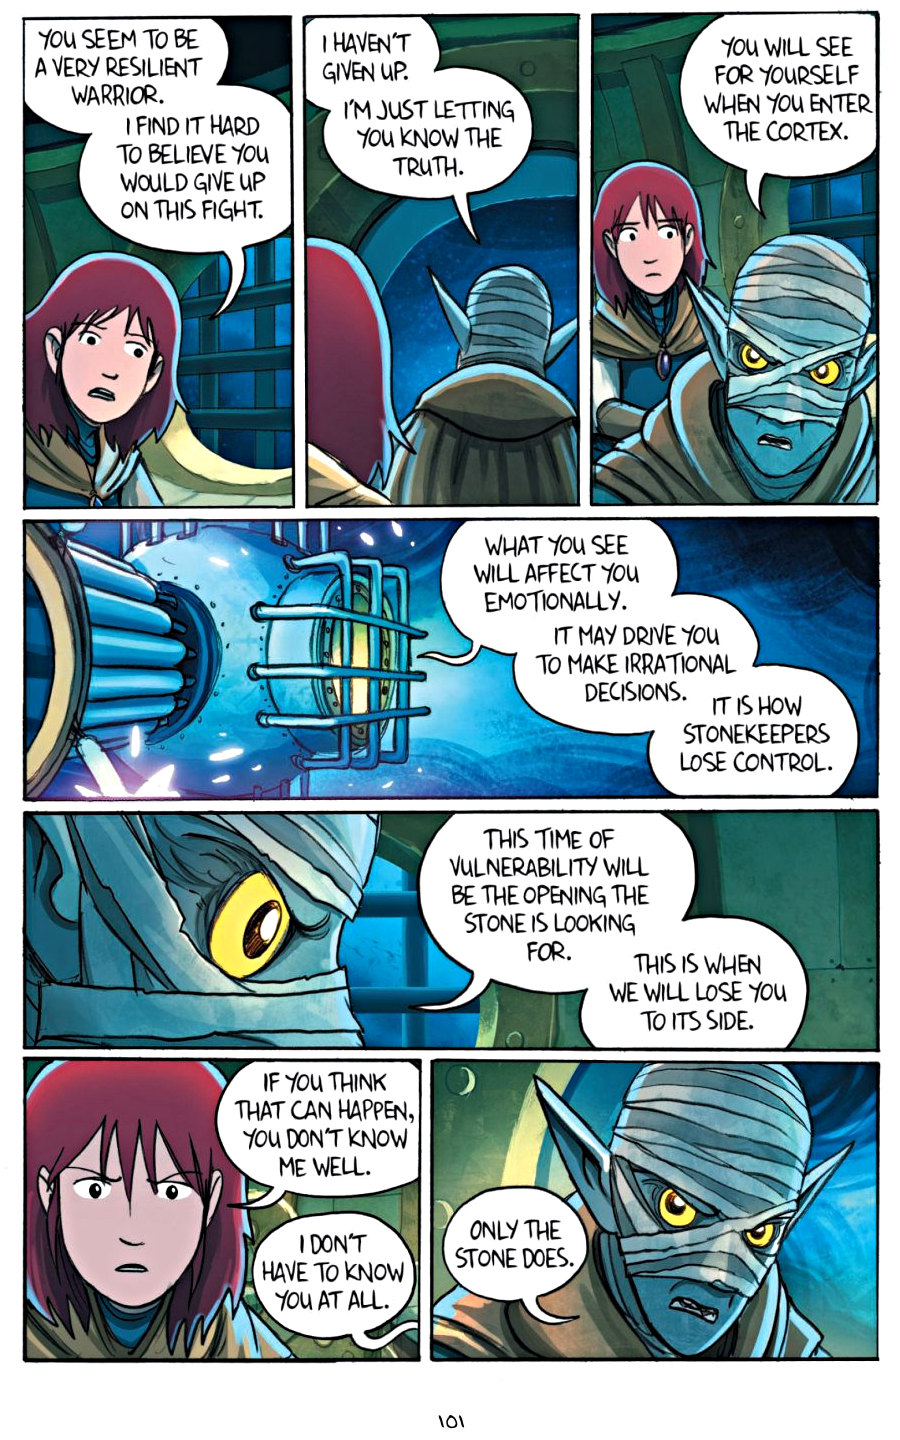 page 101 of amulet 7 firelight graphic novel